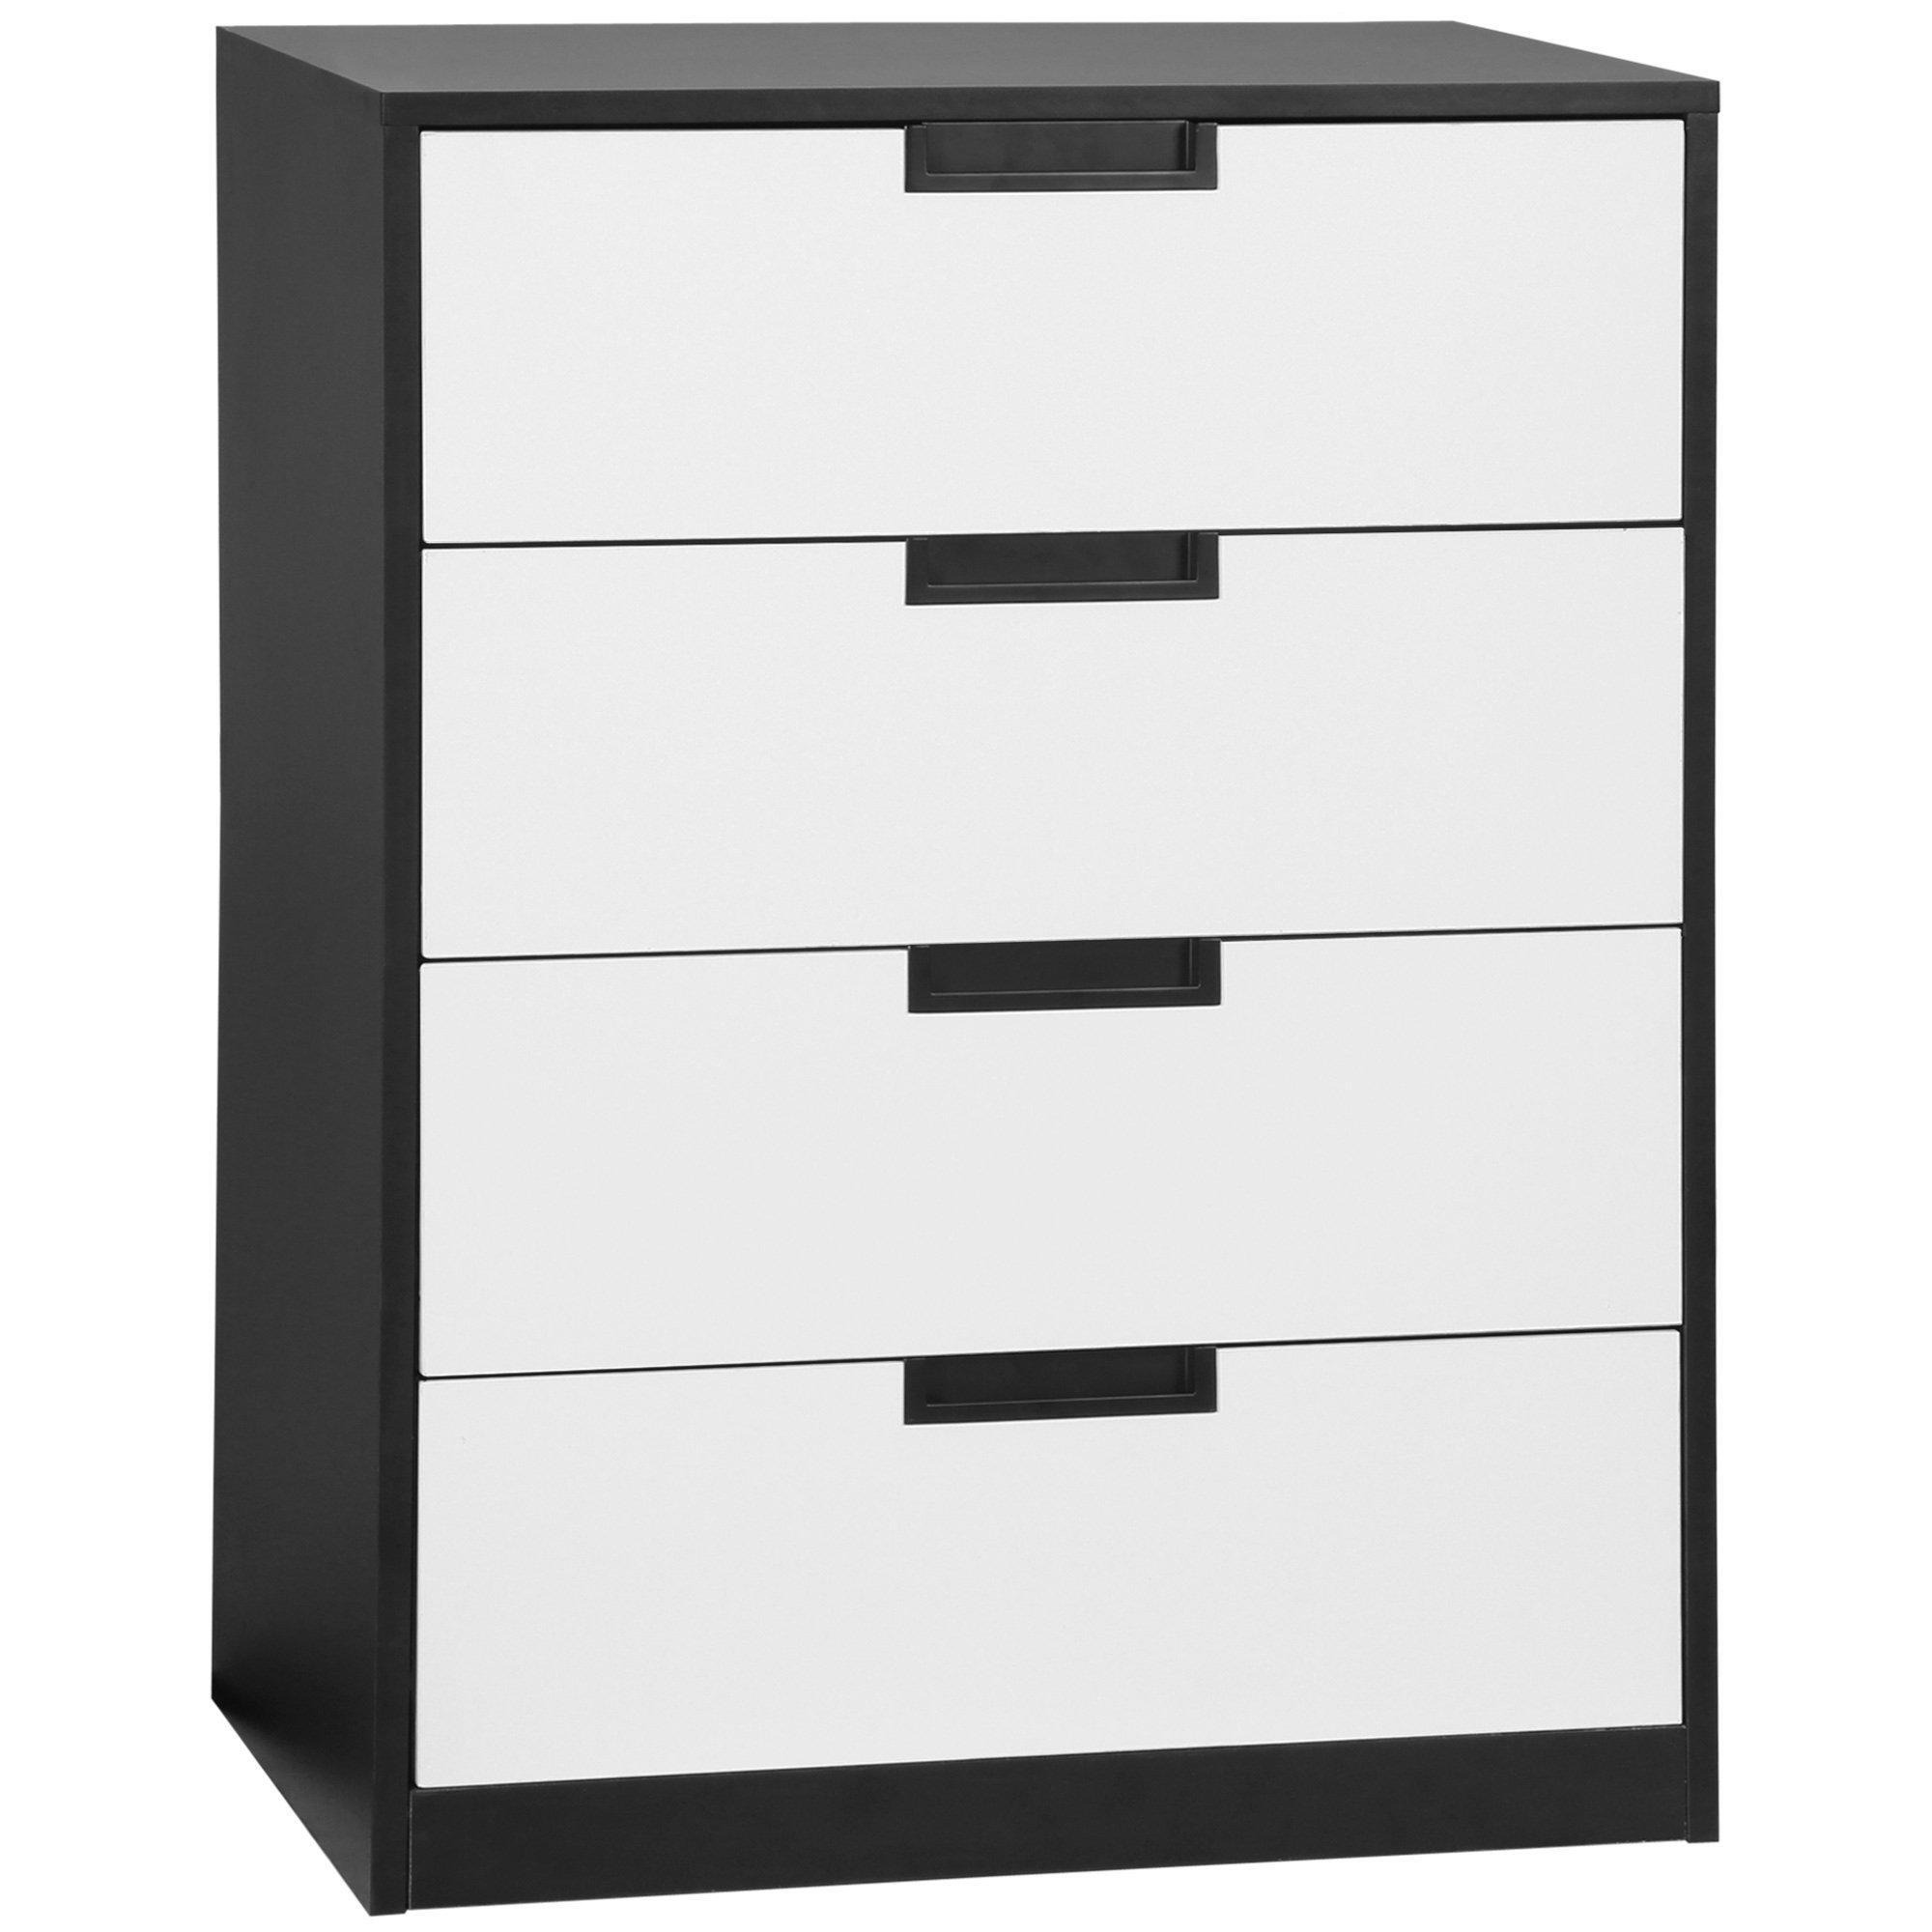 Chest of Drawers 4 Drawers Cabinet Organiser Unit with Handles - image 1